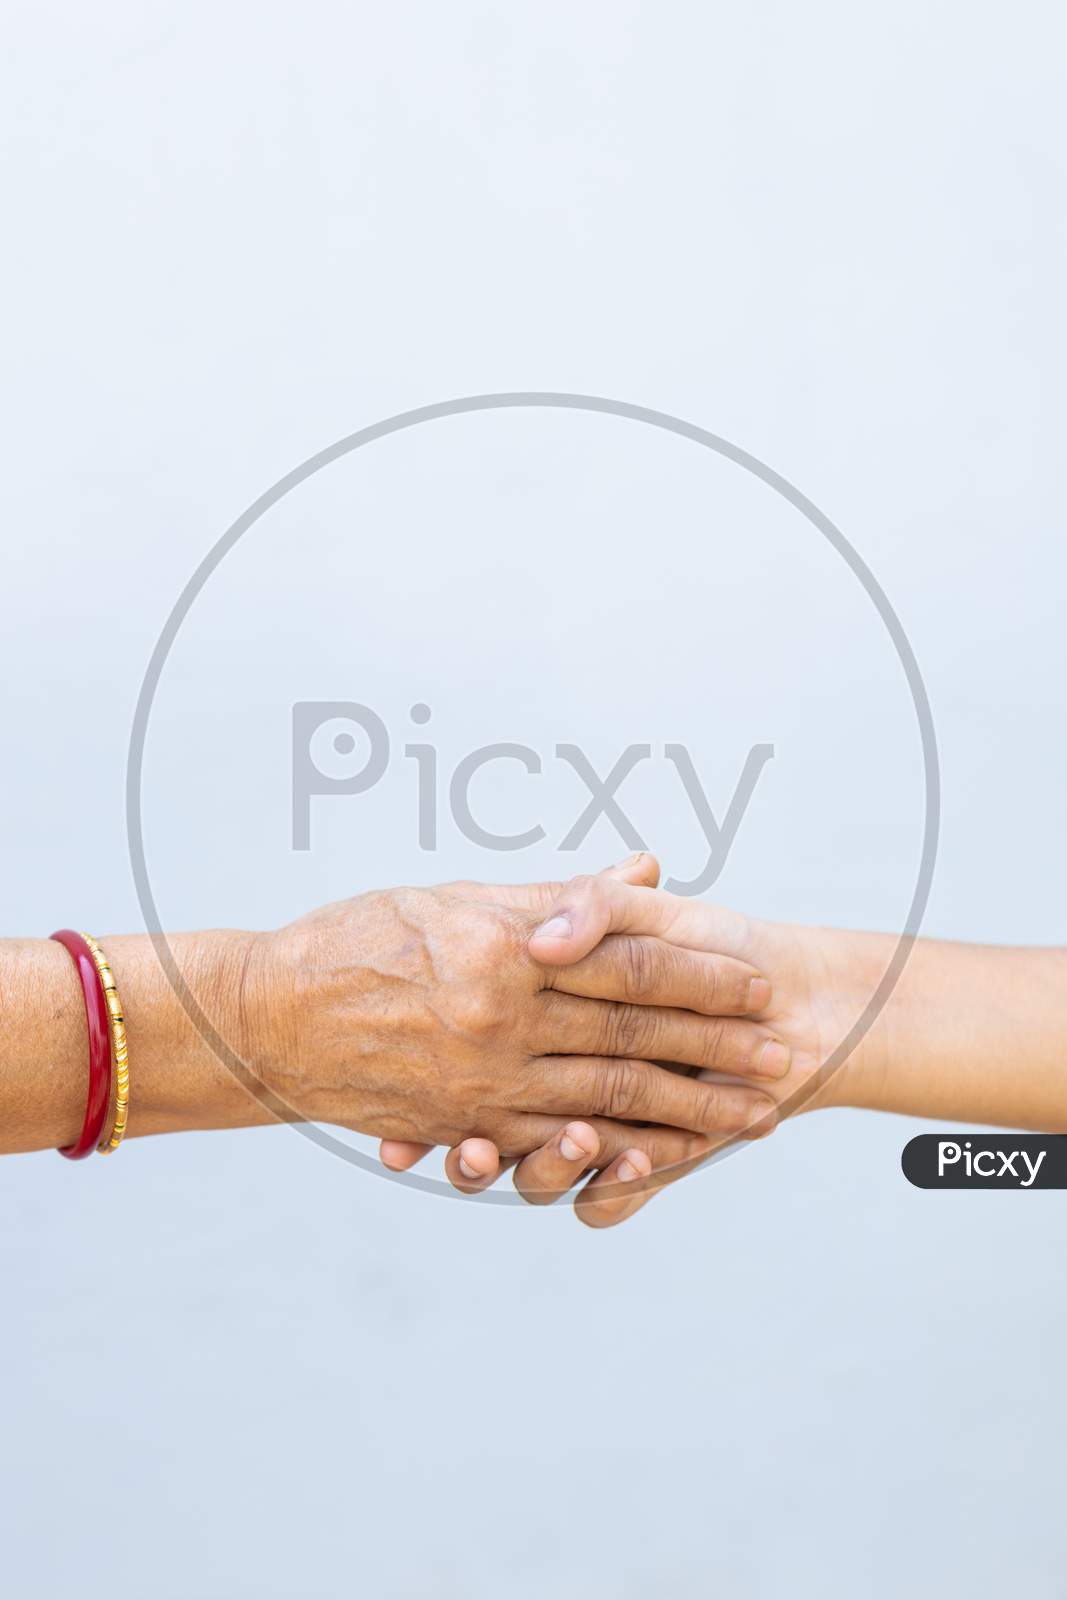 Senior Woman And Child Holding Hands Against Plain Background